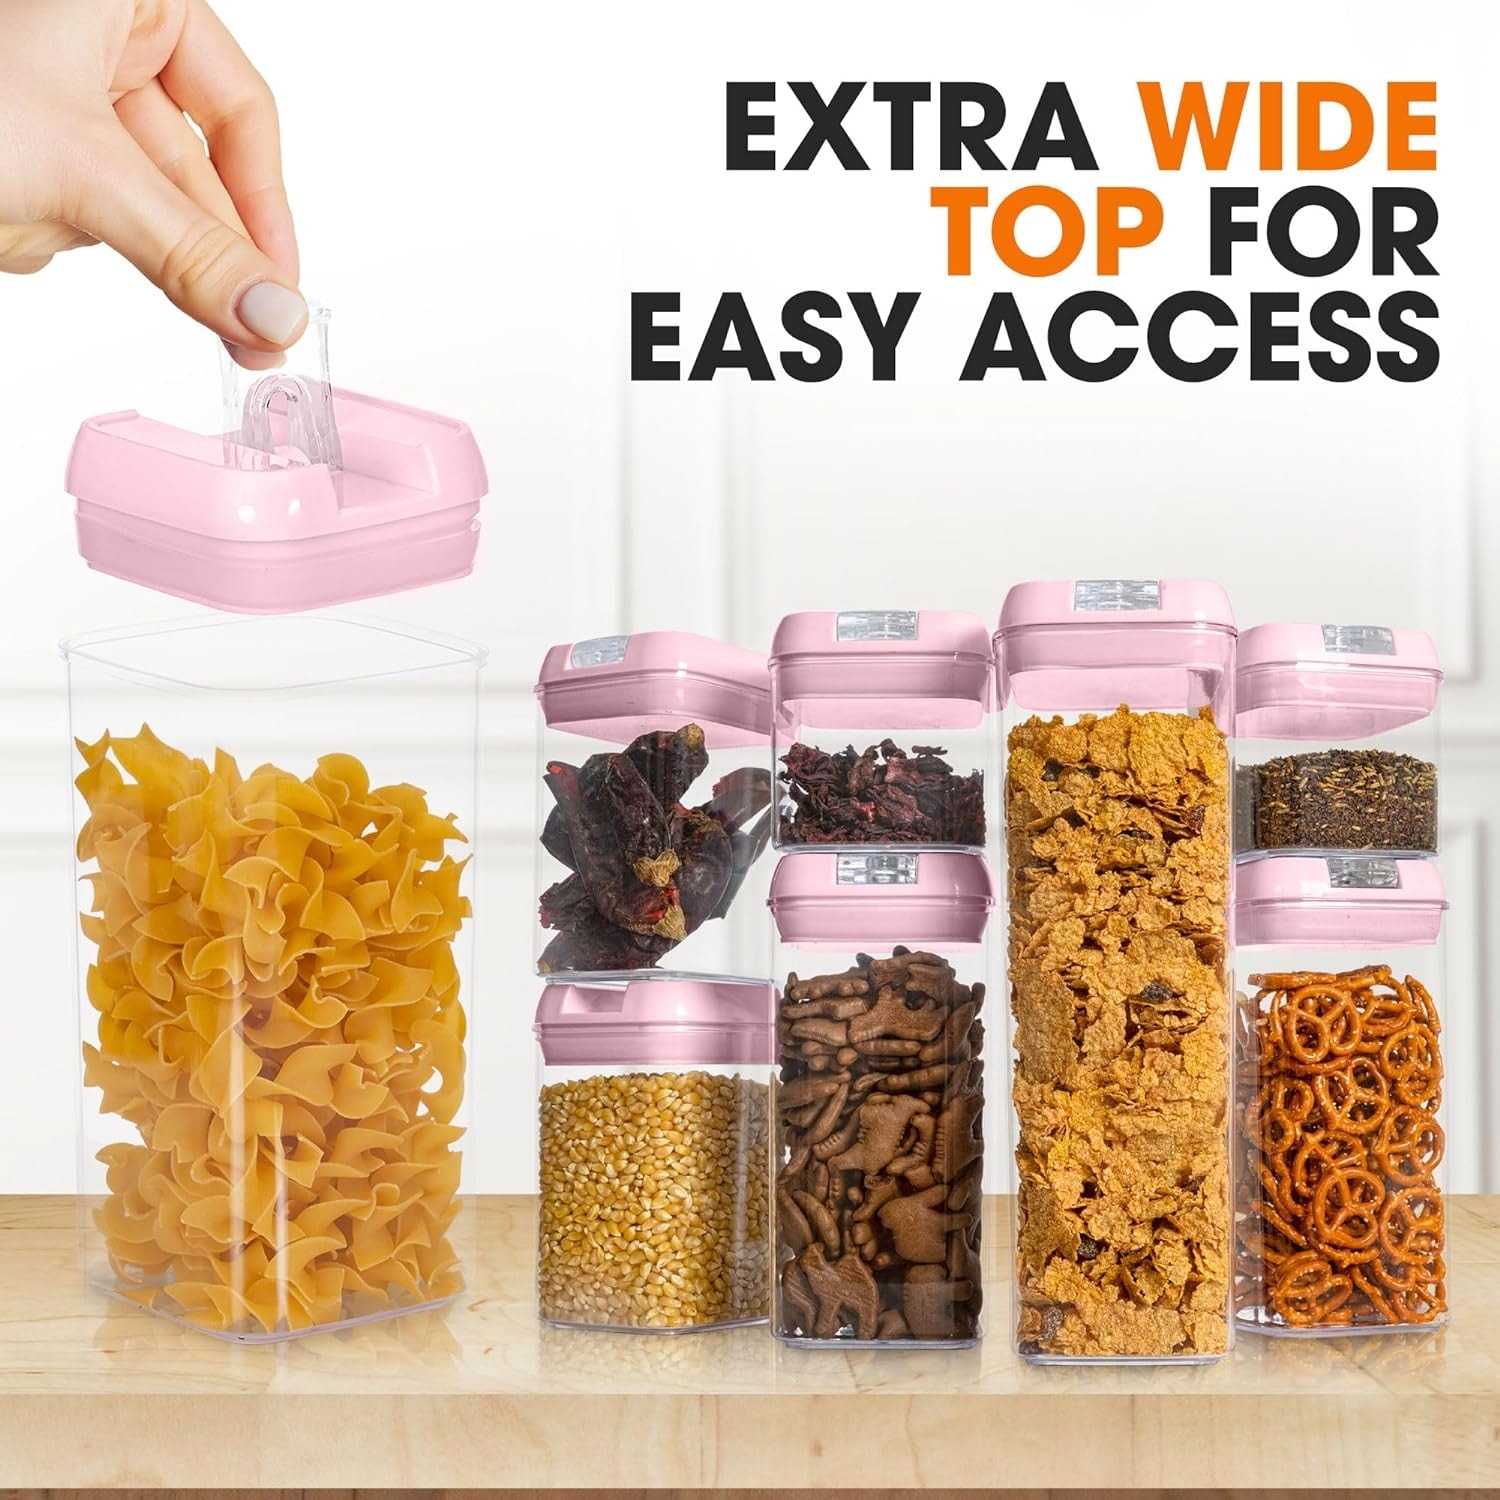 https://ak1.ostkcdn.com/images/products/is/images/direct/3e1cb88e082d40b383363334d30dbbc1ef038d41/Cheer-Collection-7-piece-Stackable-Airtight-Food-Storage-Container-Set.jpg